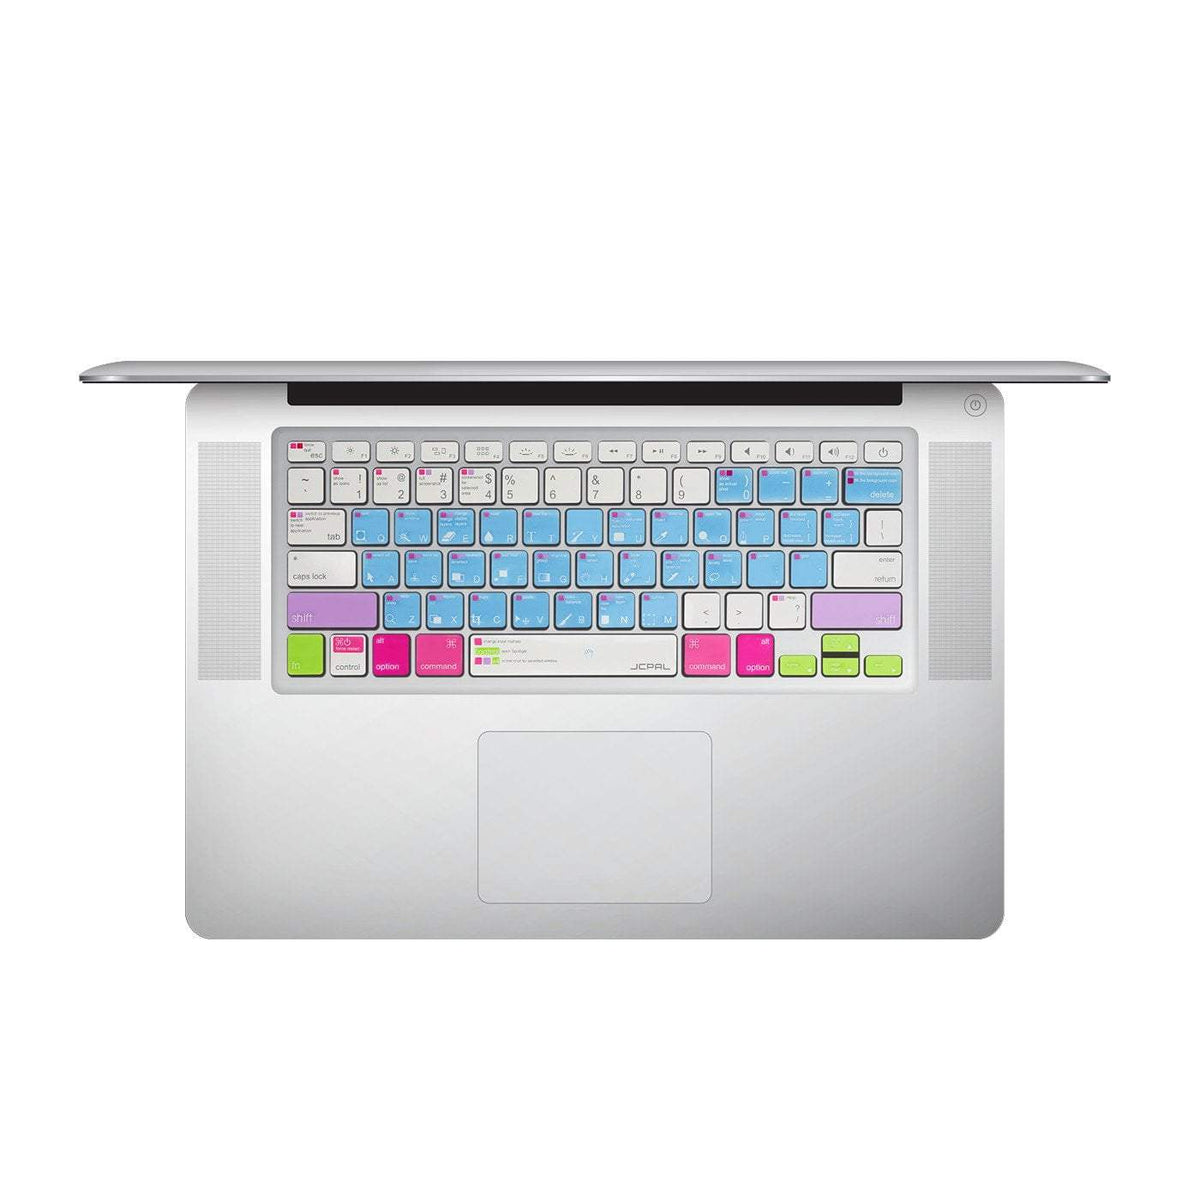 JCPal Unavailable VerSkin Photoshop Shortcut Keyboard Protector (US-Layout) MacBook Pro 13&quot;/15&quot;/17&quot; - Air 13&quot; - Wireless Keyboard